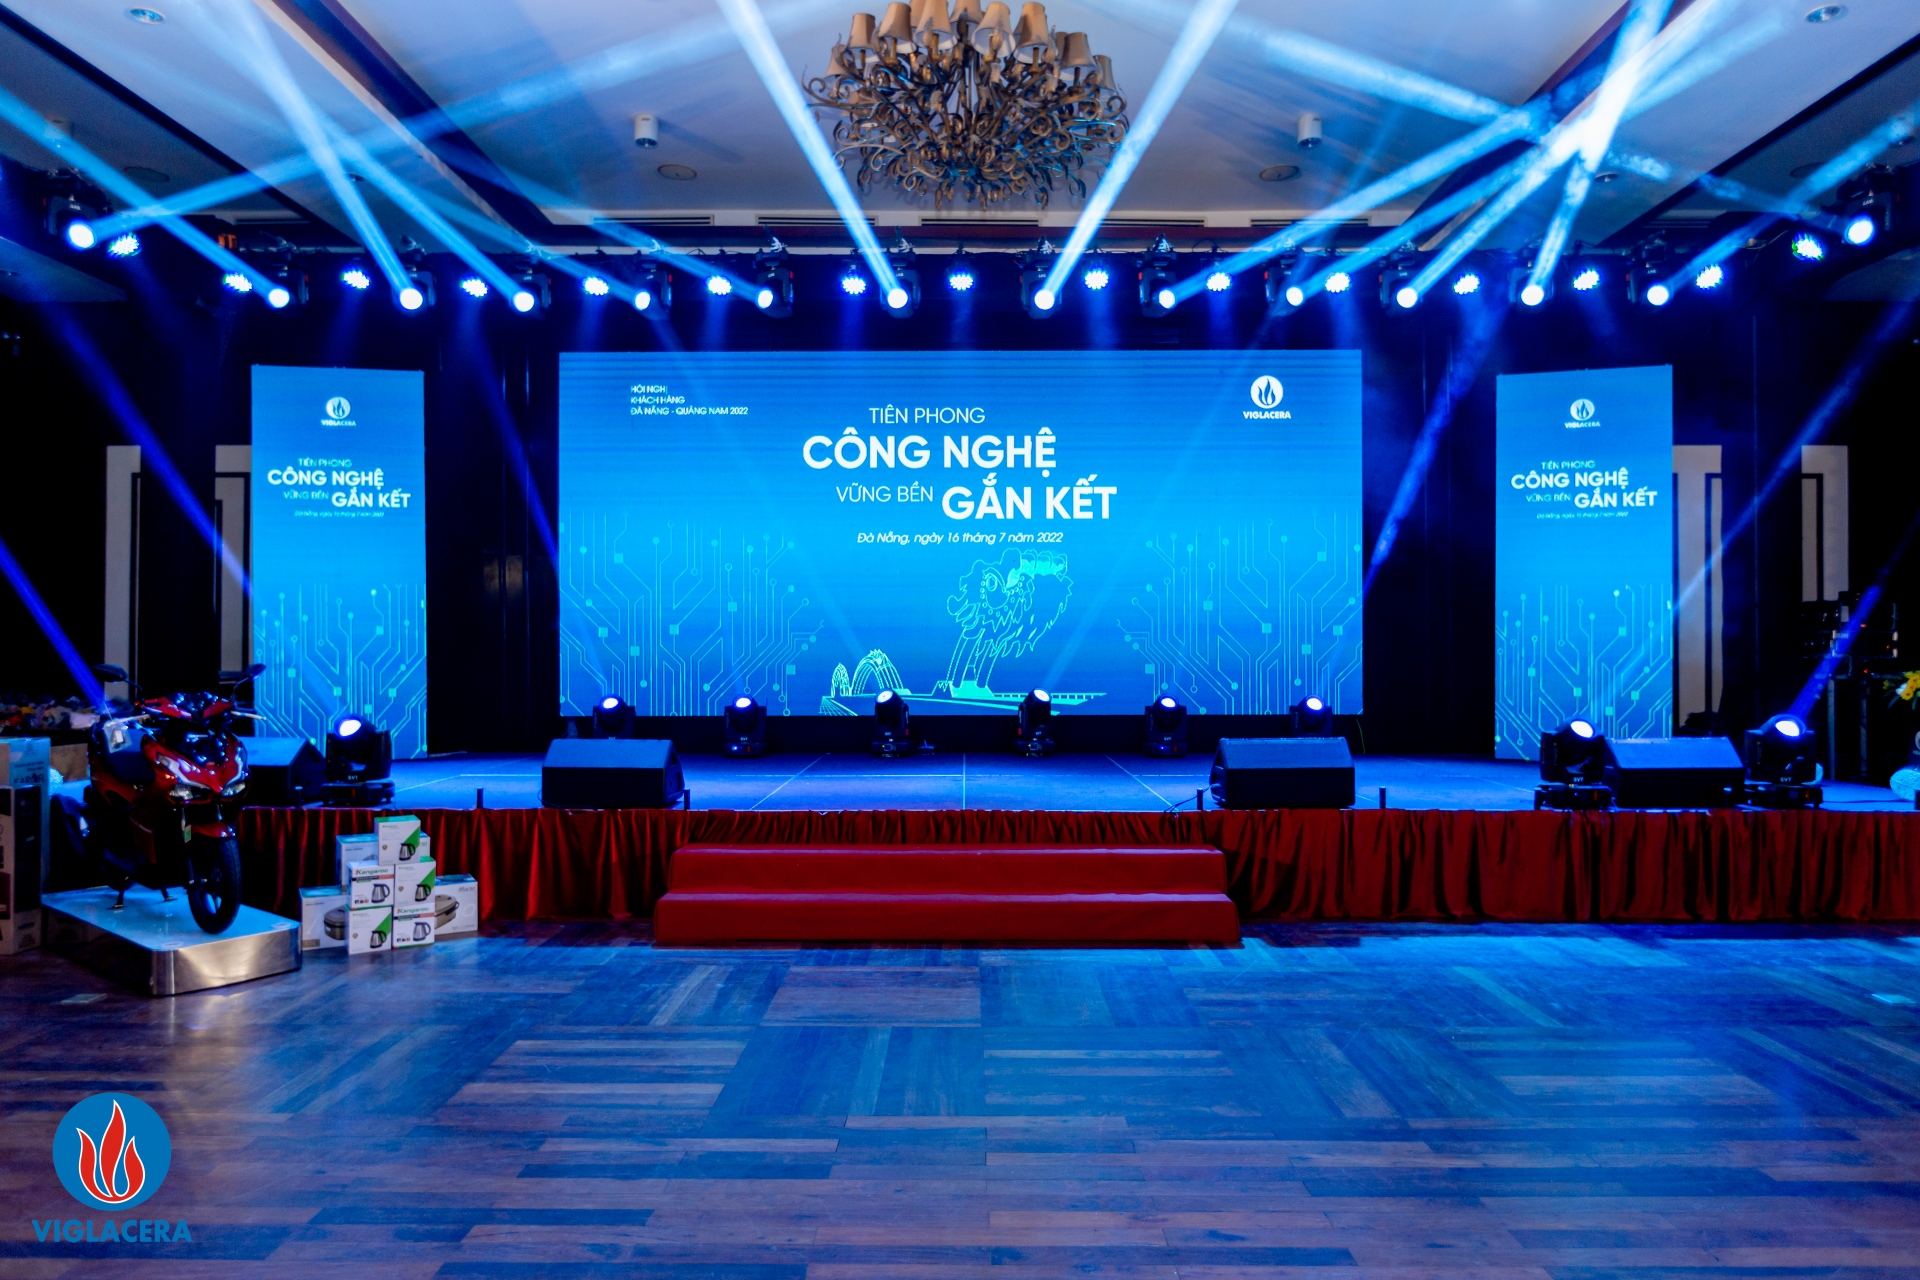 Viglacera held a Great Technology and New Products Party at the Quang Nam - Da Nang Customer Conference